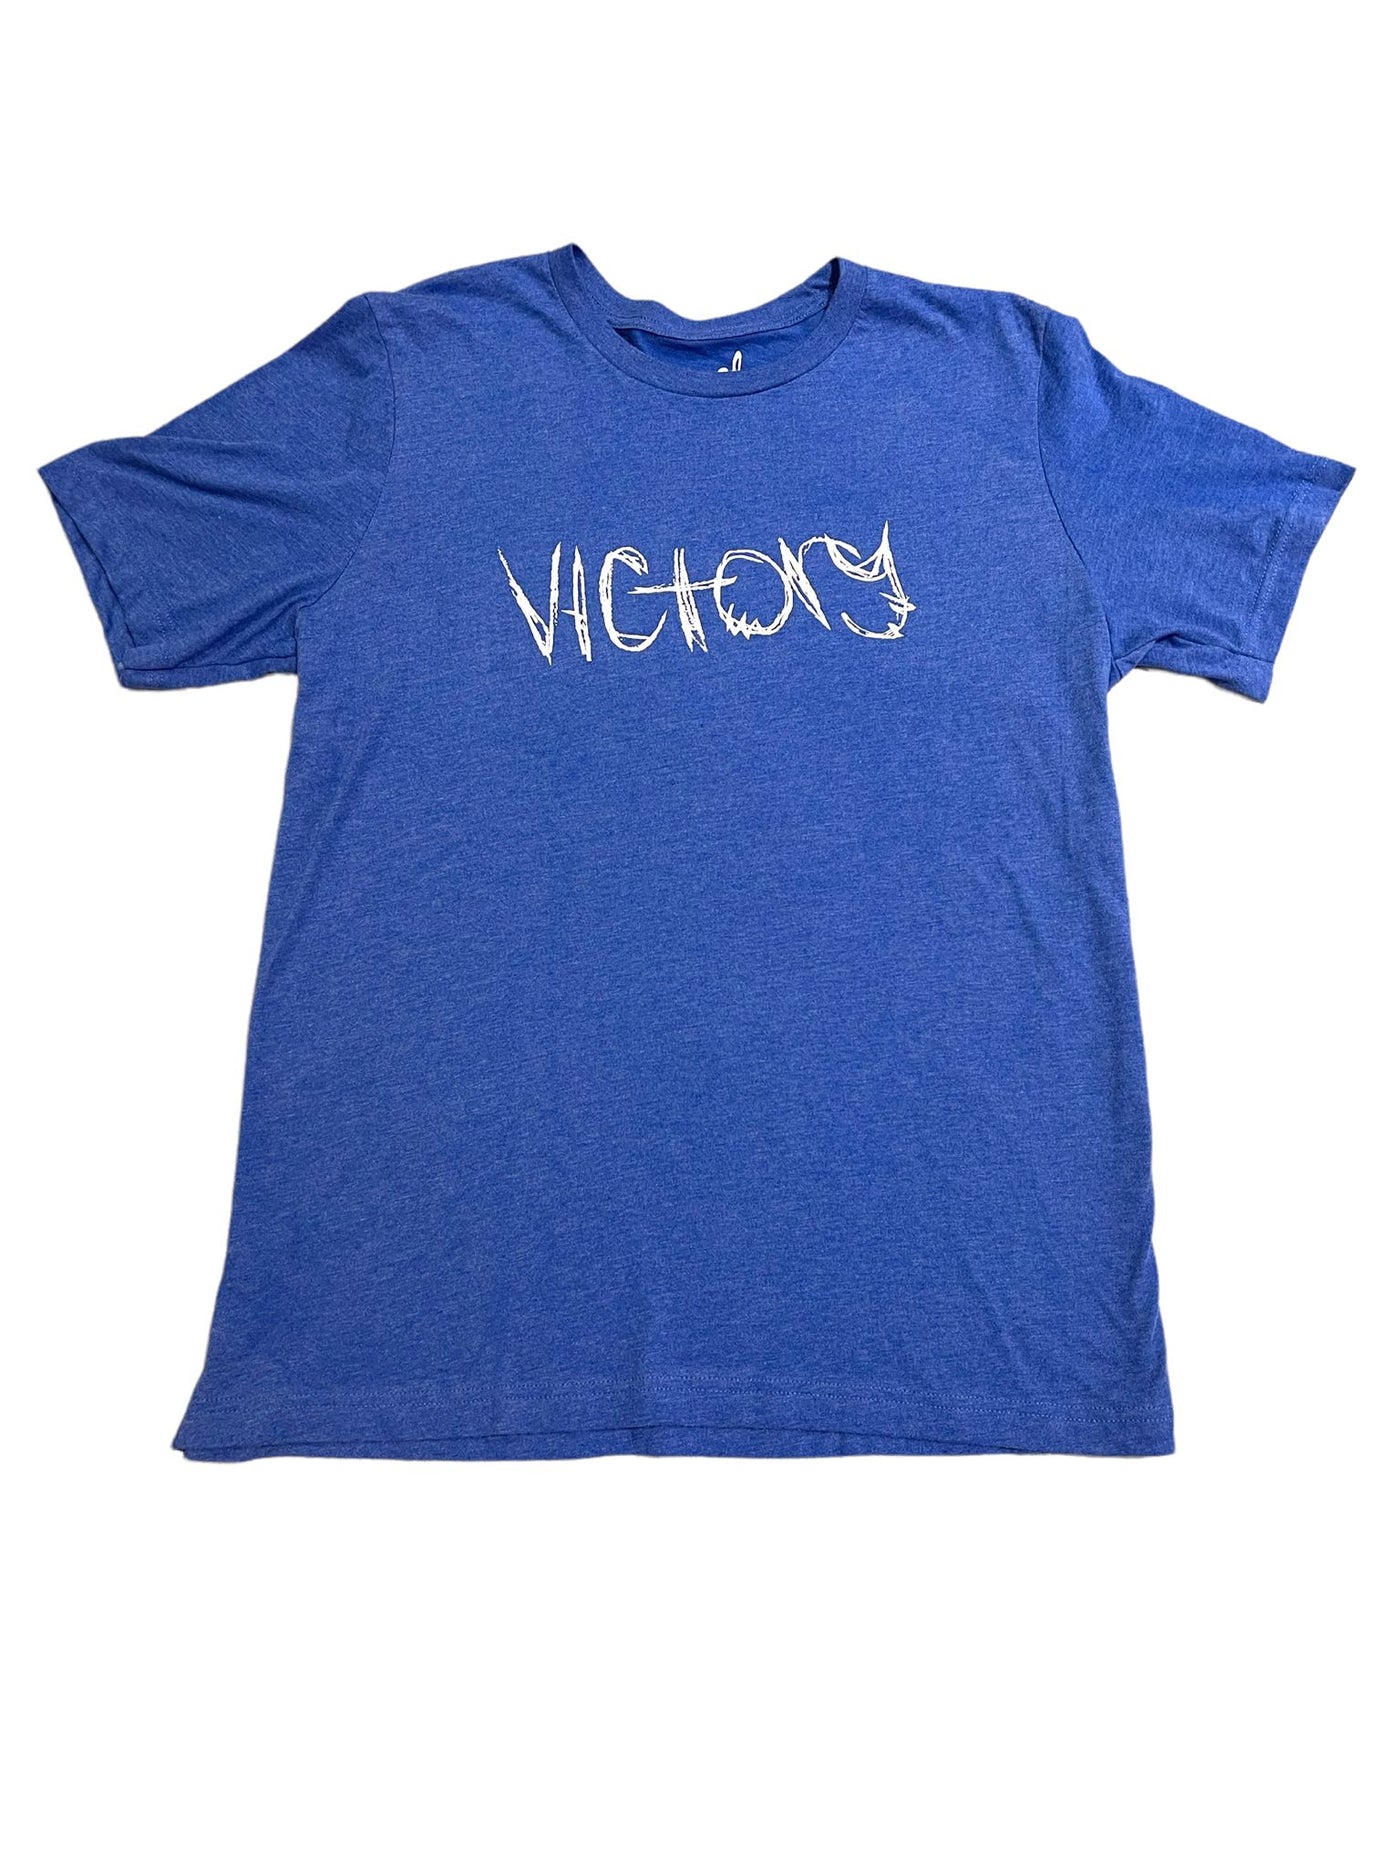 Vaiana - Navy Blue Sueded Tee (Victory)